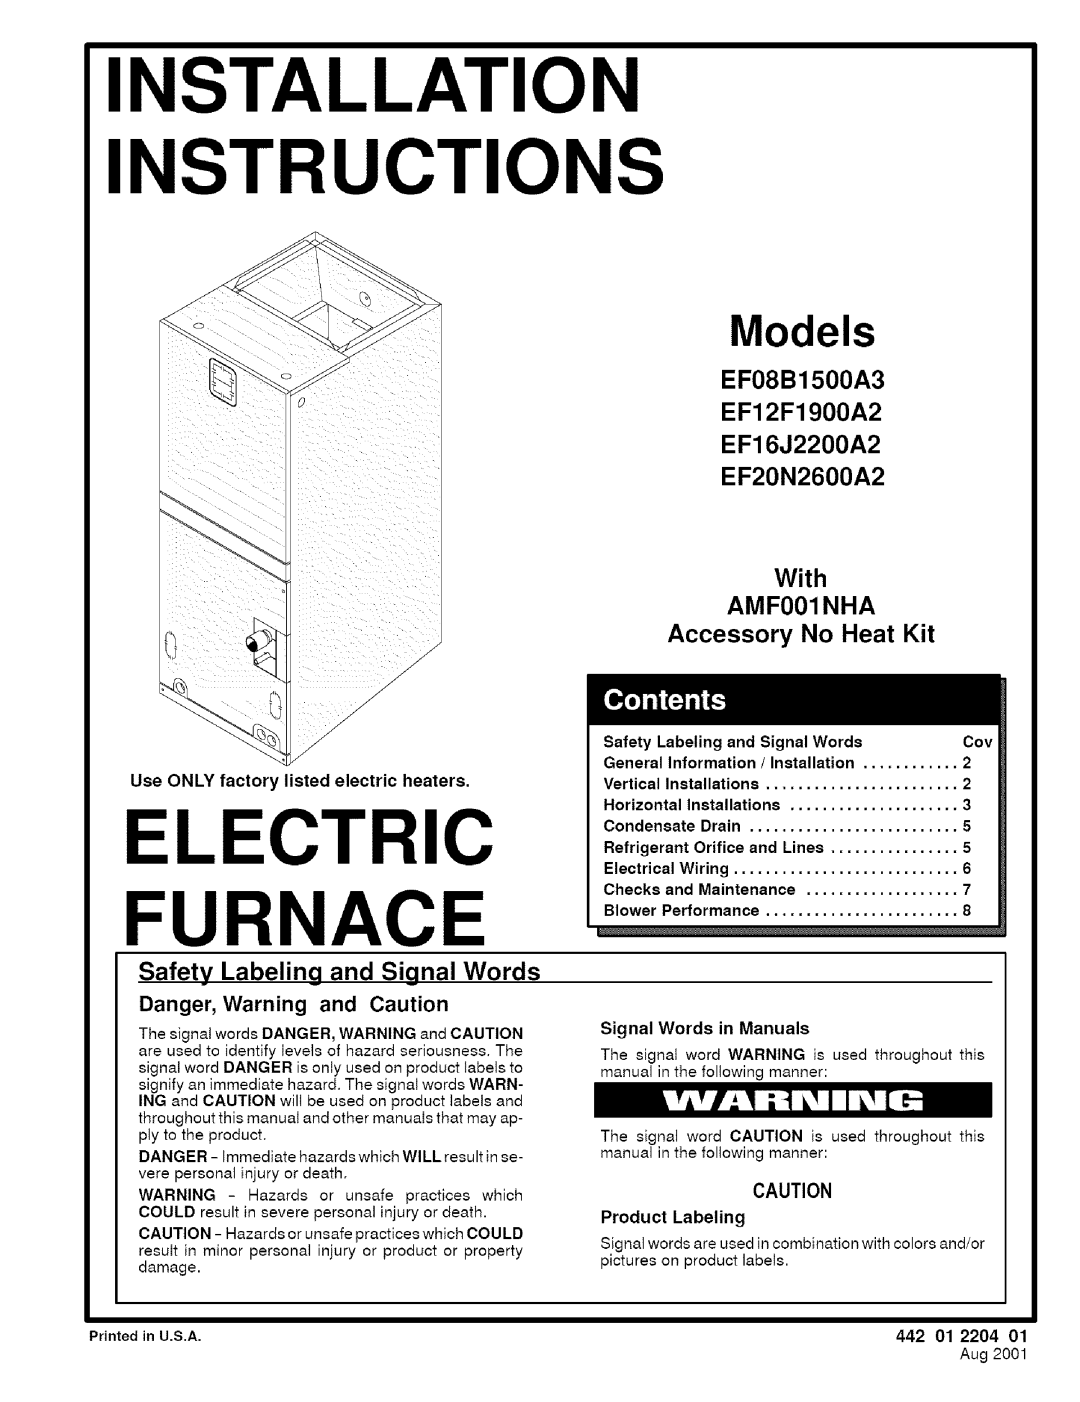 Sears EF12F1900A2 installation instructions With AMF001NHA Accessory No Heat Kit, Safety Labeling and Signal Words, Models 